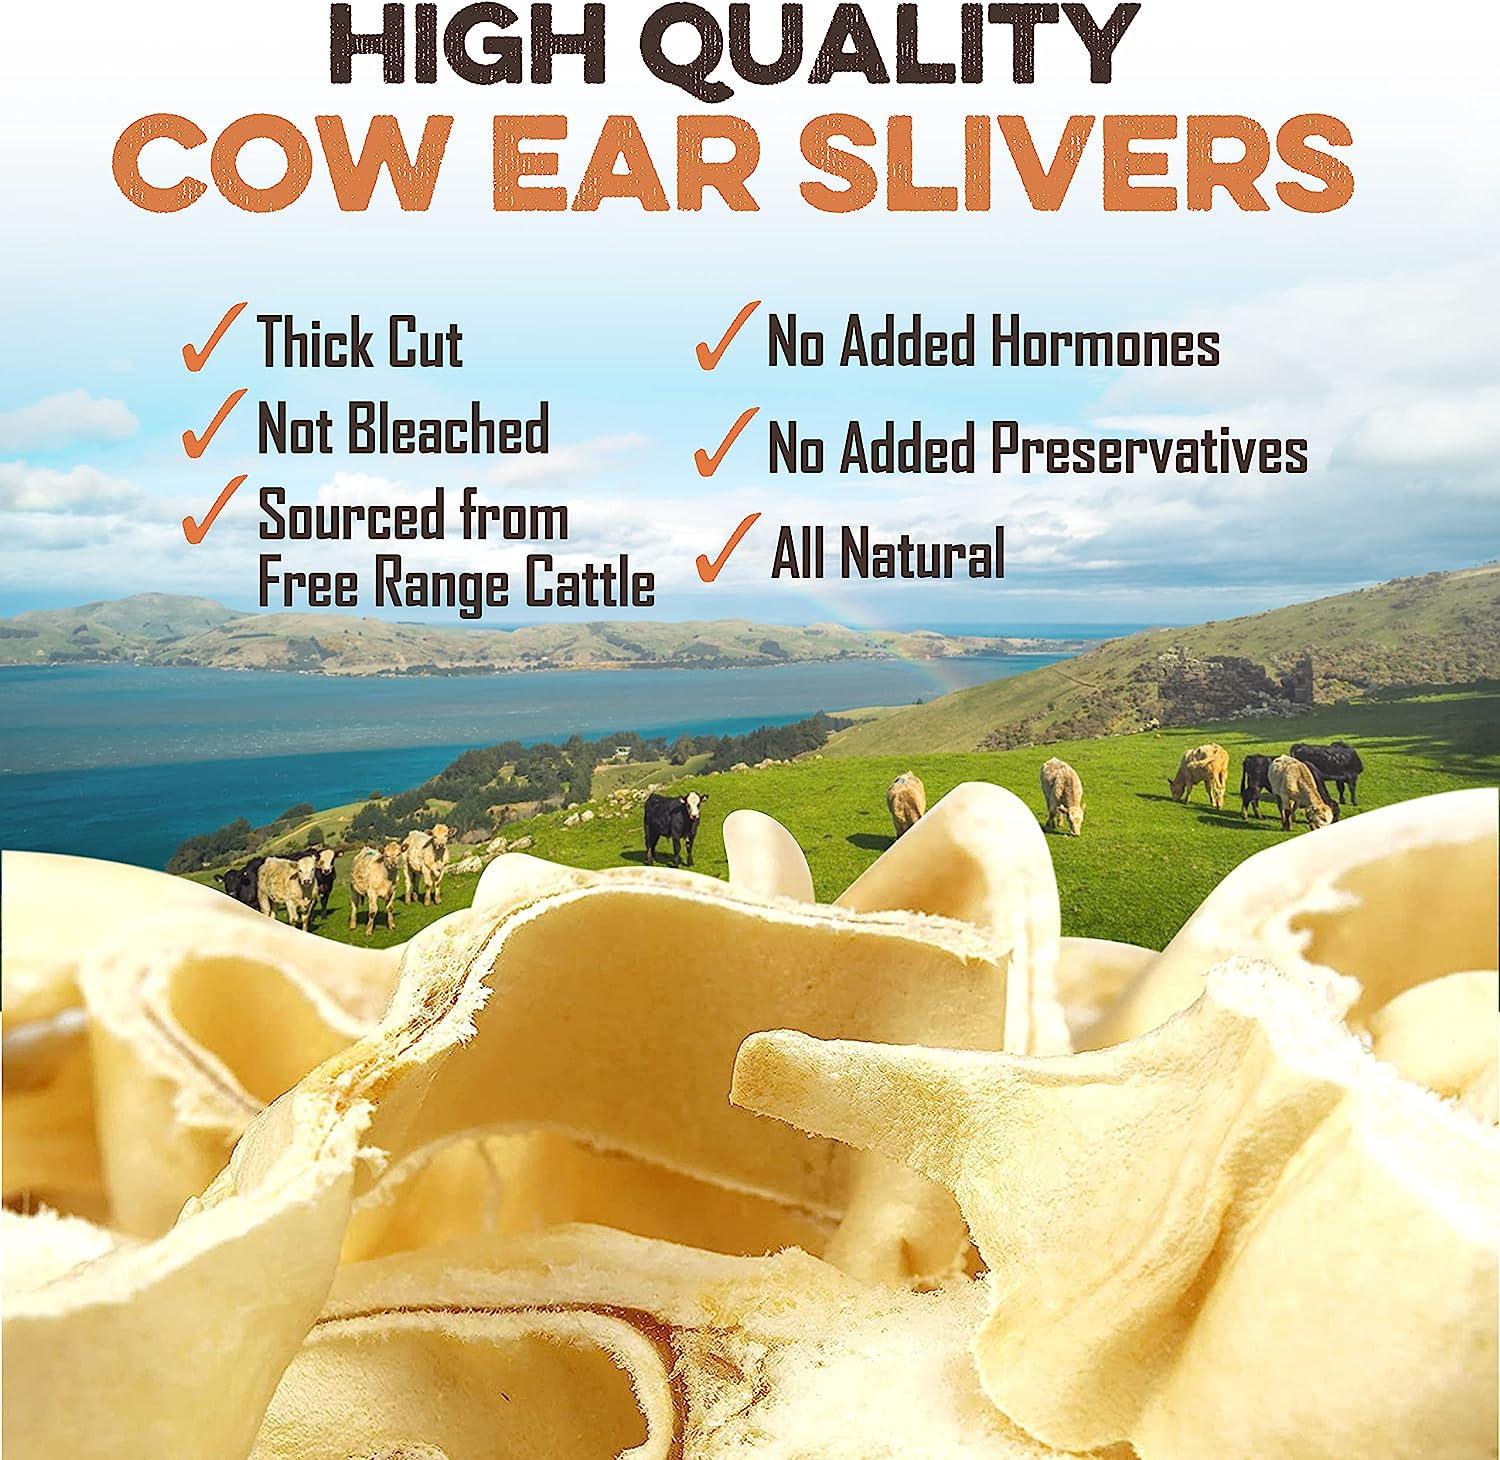 Cow Ear Slivers for Dogs, All Natural Cow Ear Dog Treats - Brutus & Barnaby